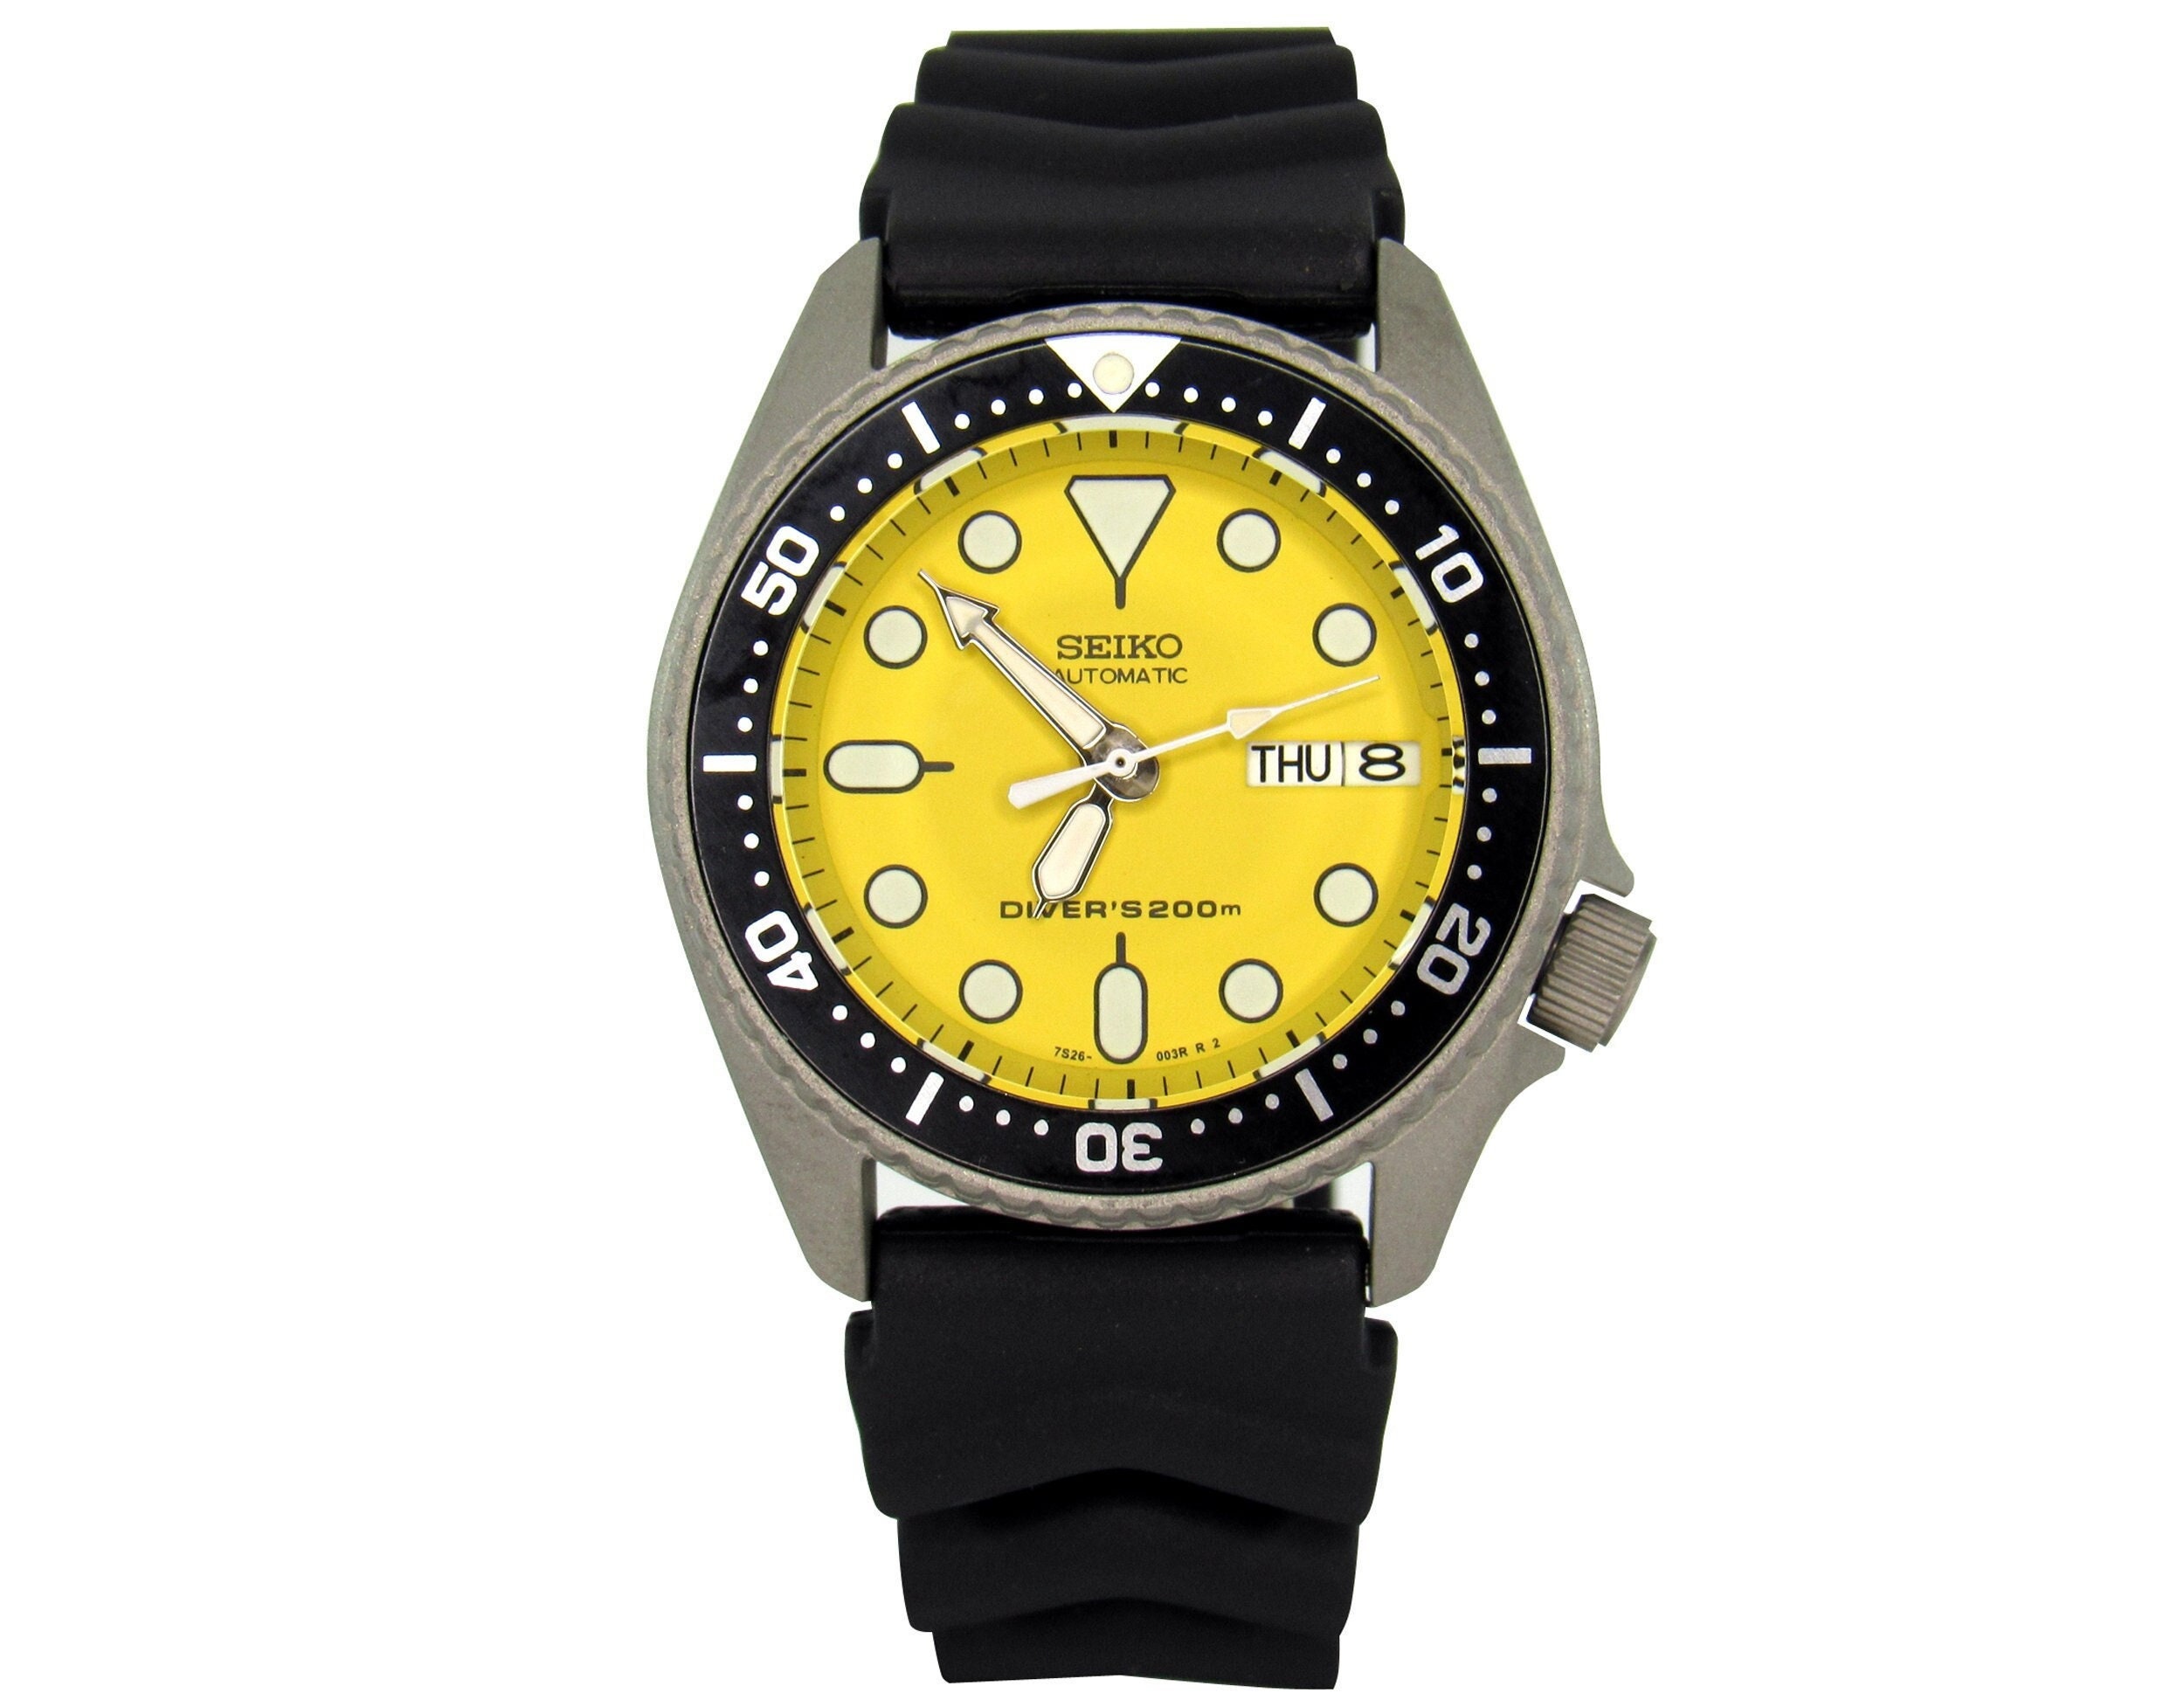 Vintage Watch Seiko Skx013 Mod Divers Watch Nh36a YELLOW Dial - Etsy Finland